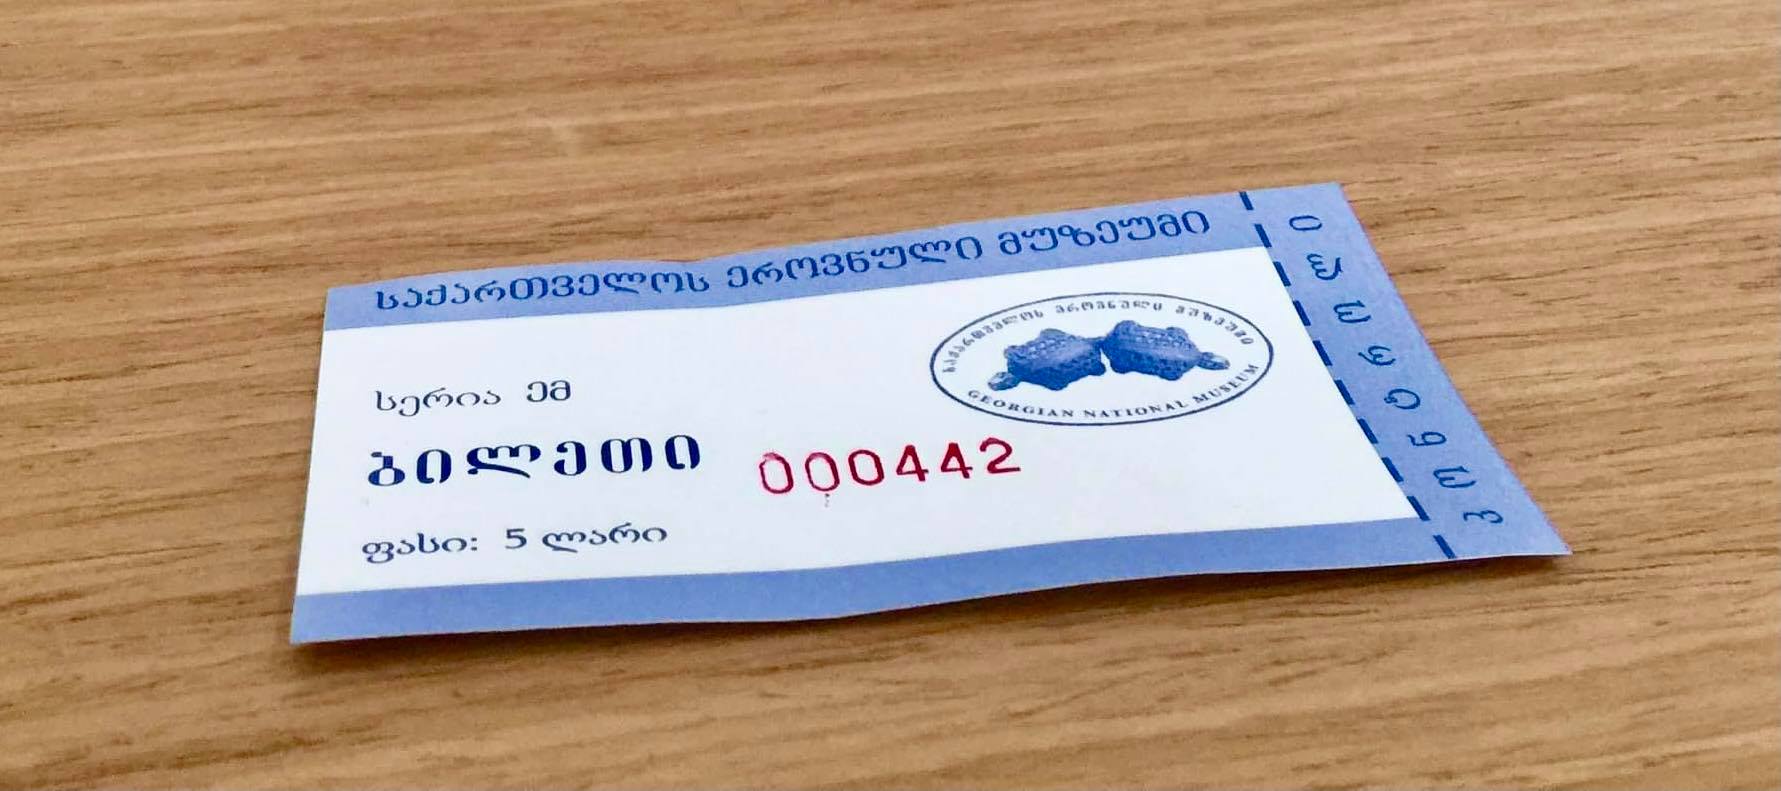 Tbilisi History museum entrance ticket for 5 GEL